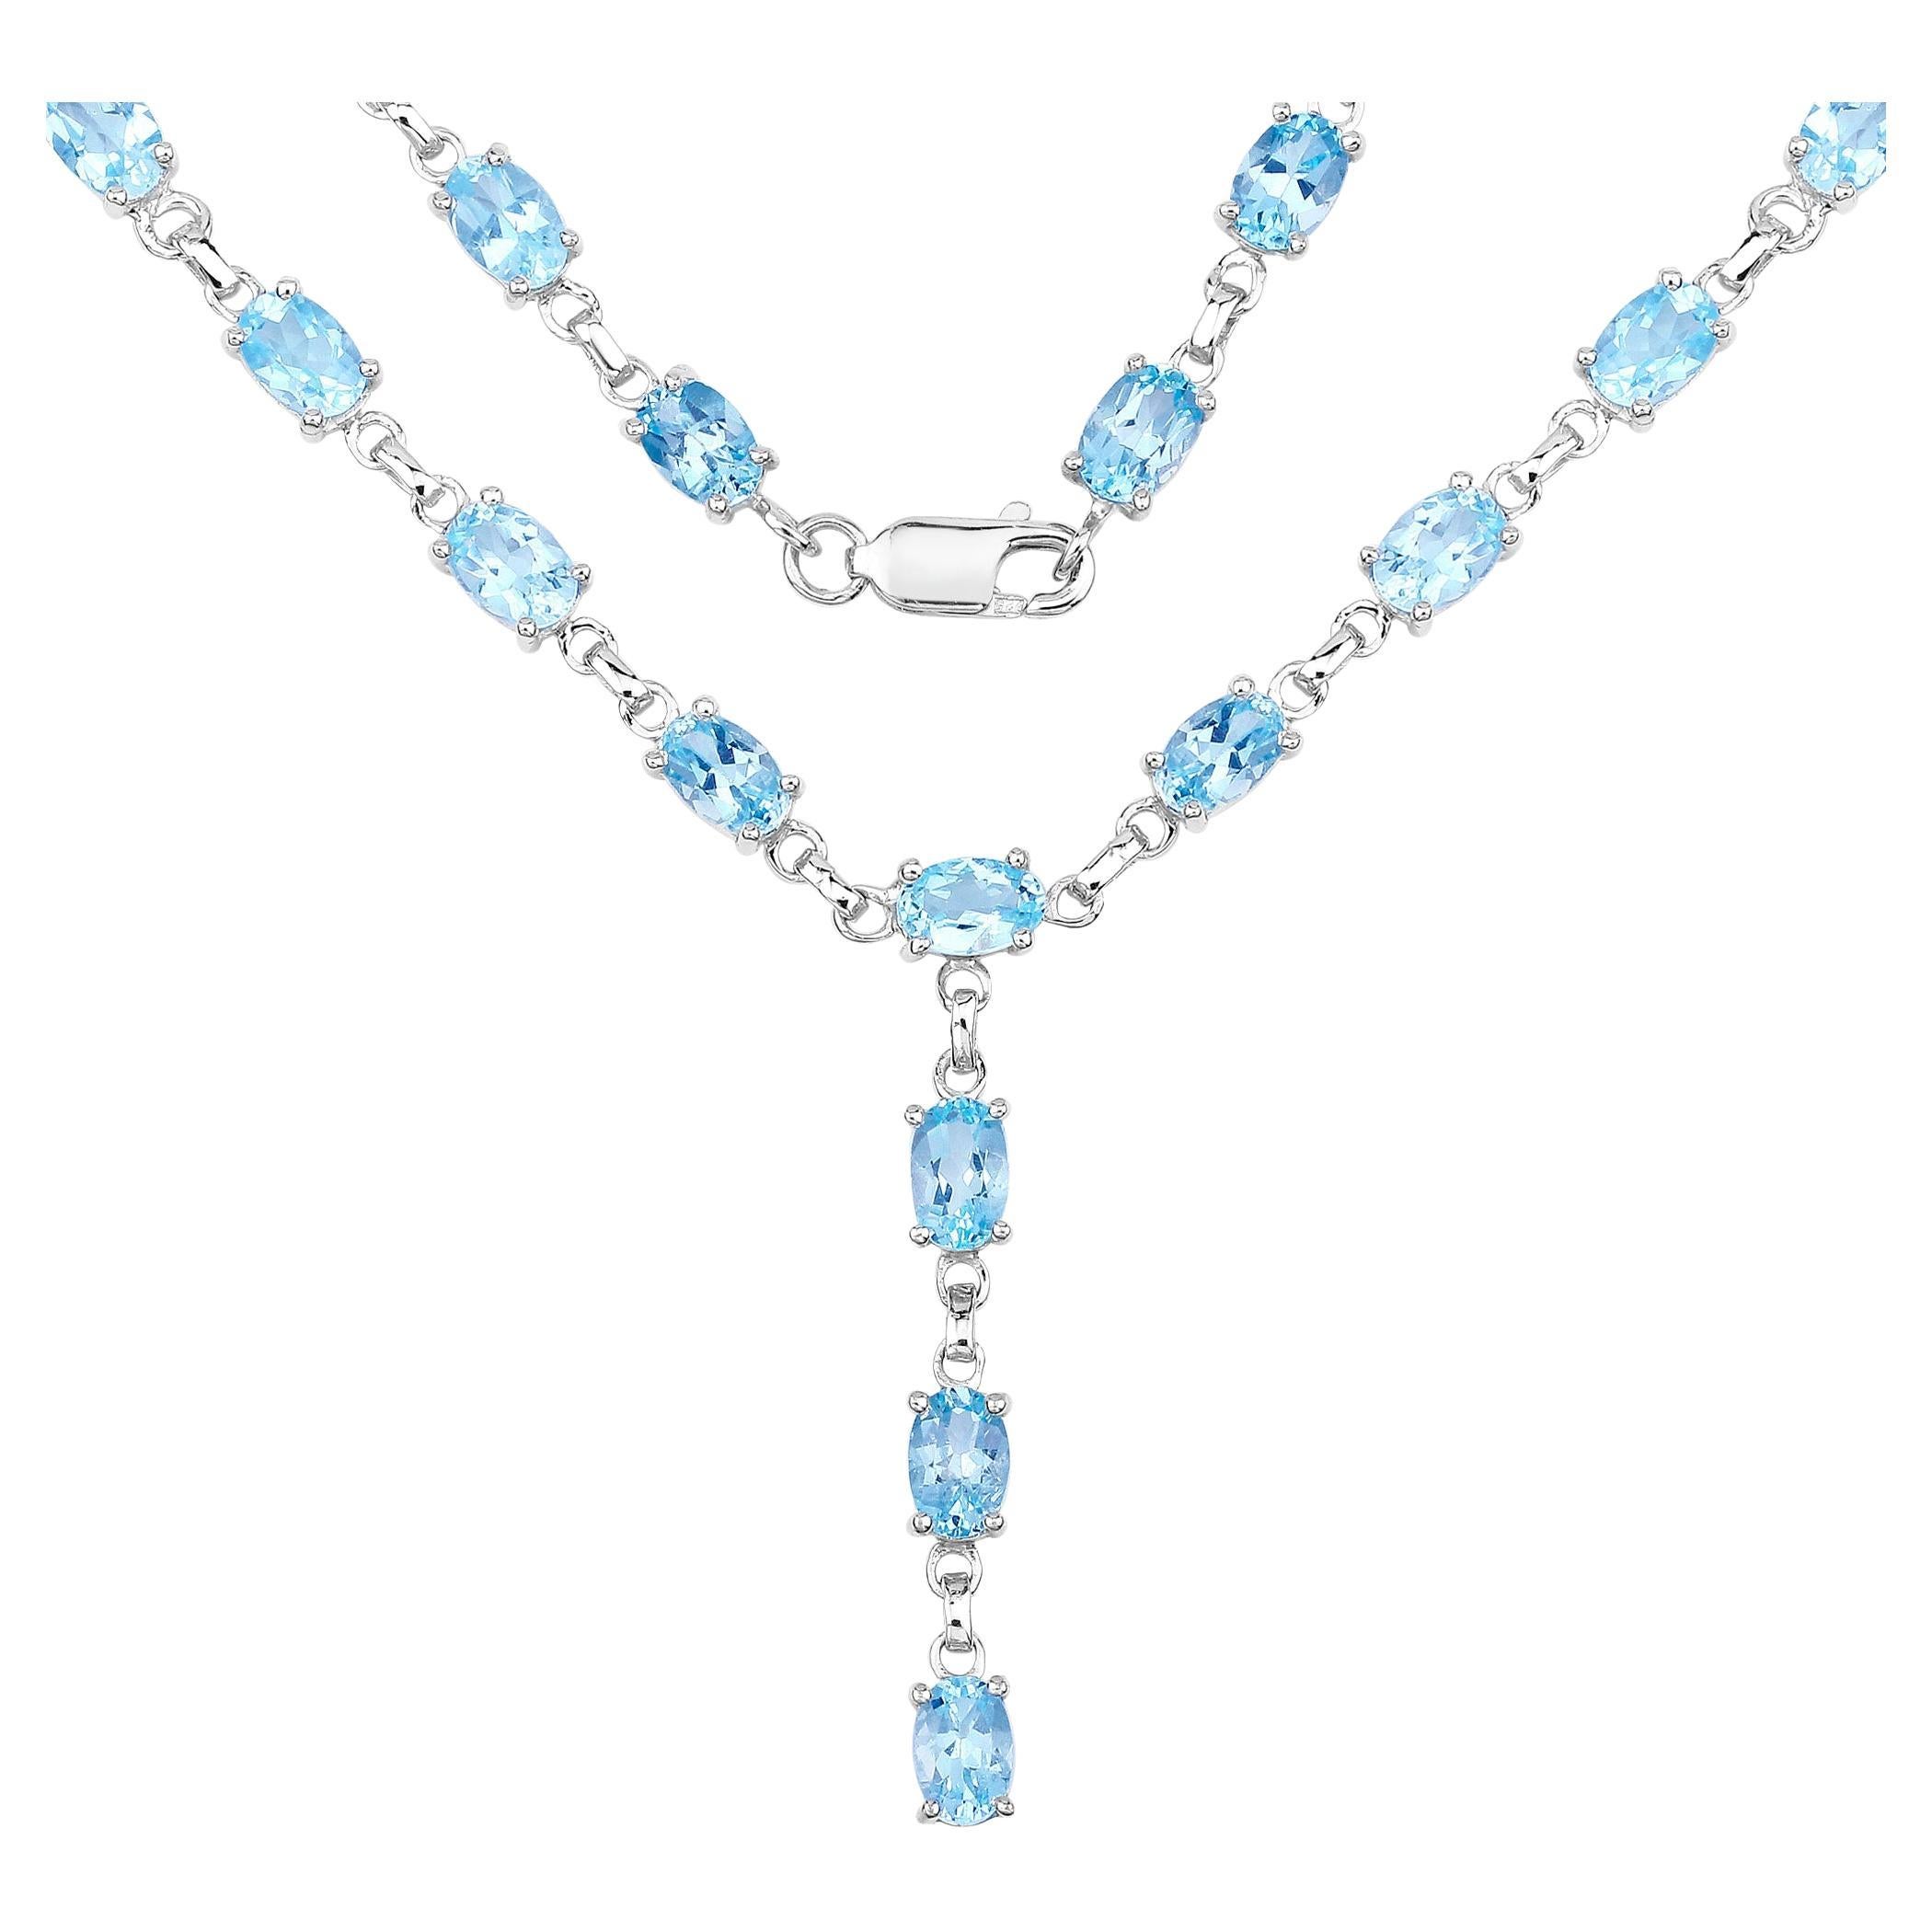 Blue Topaz Drop Necklace 23 Carats Sterling Silver For Sale